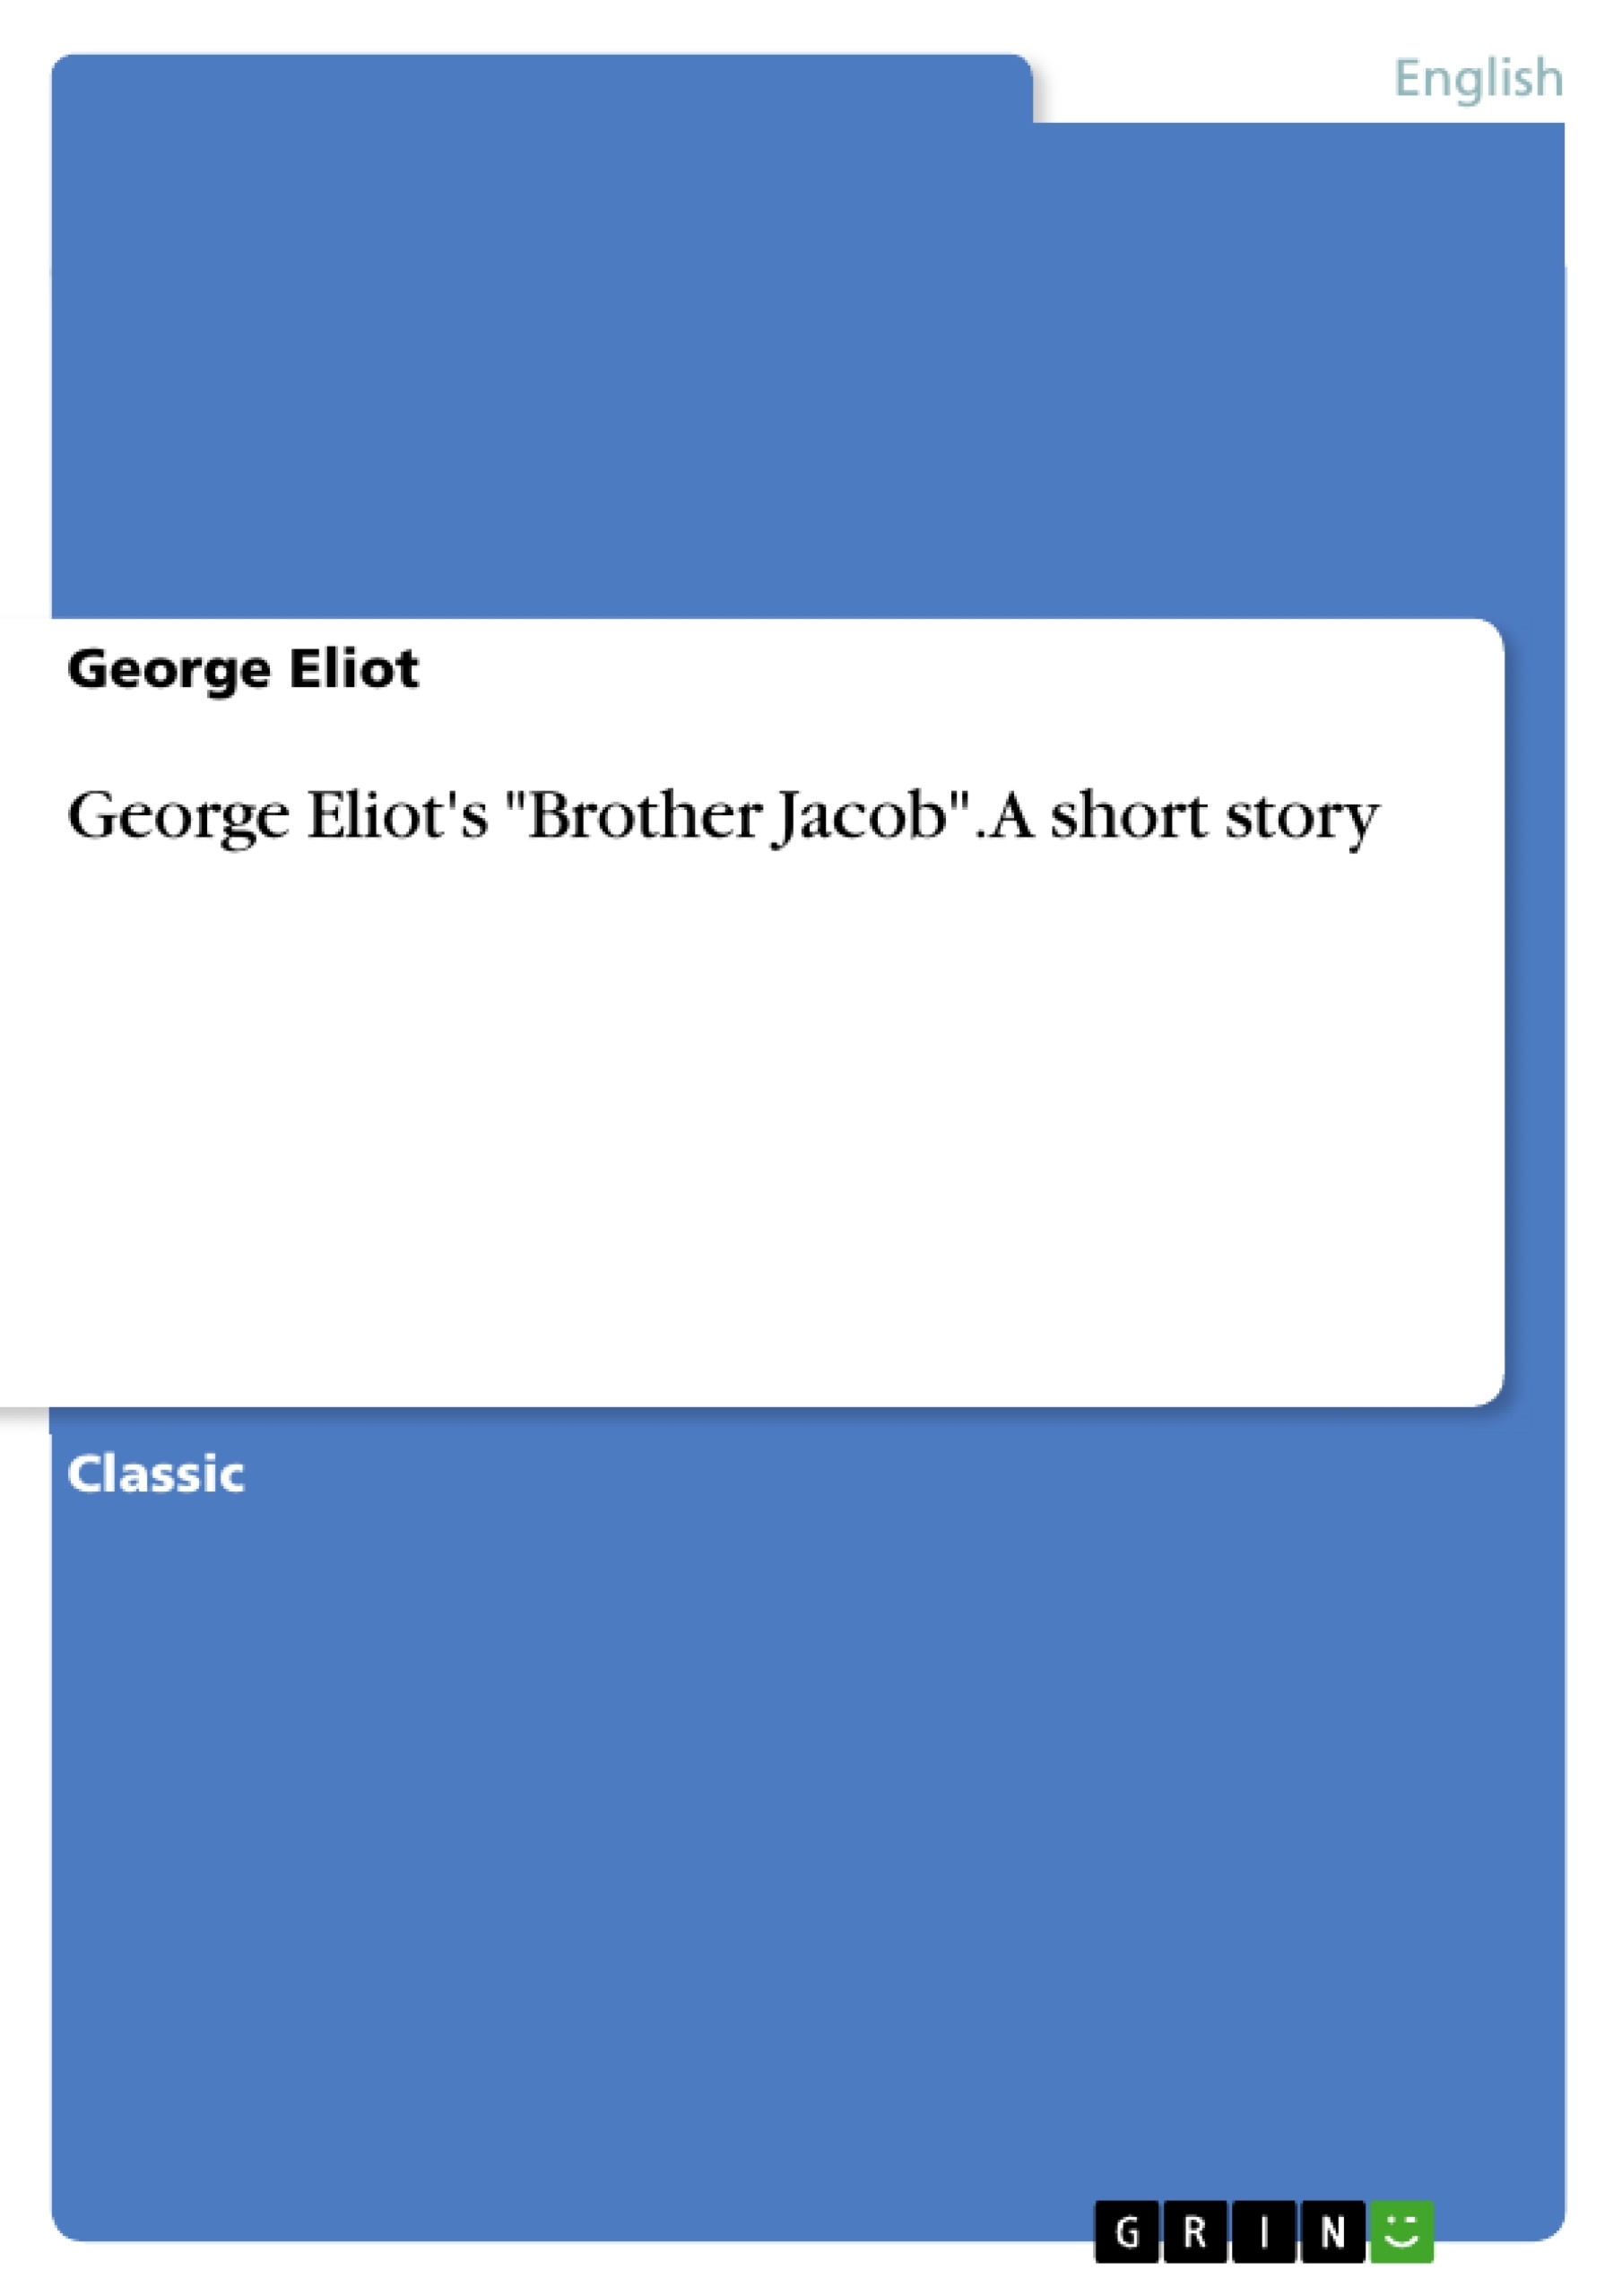 Título: George Eliot's "Brother Jacob". A short story